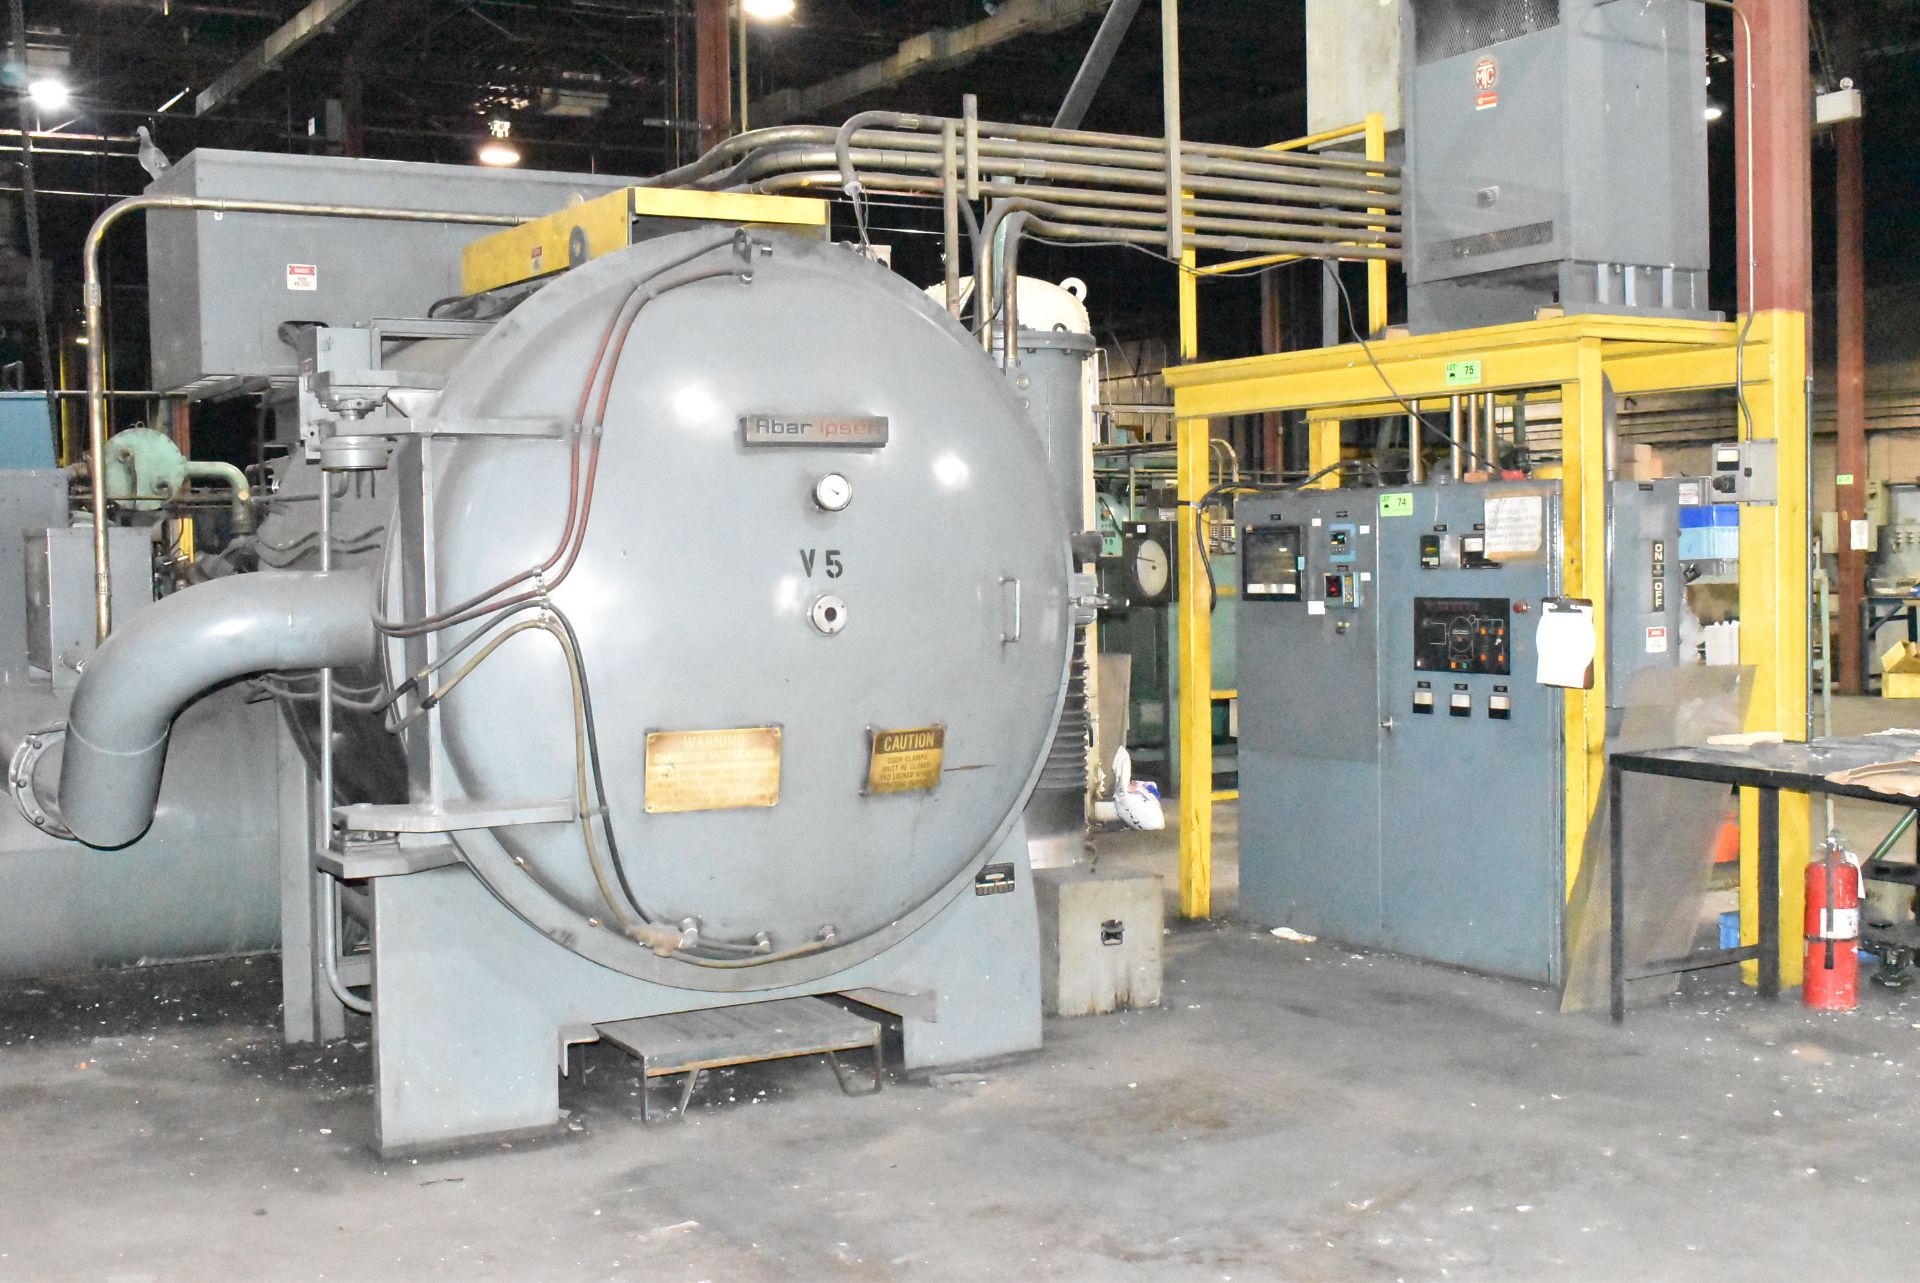 ABAR IPSEN HR 50x48 ELECTRIC VACUUM FURNACE WITH 2,400 DEGREES F MAX TEMP, 36"Wx30"Hx48"D APPROX - Image 3 of 16